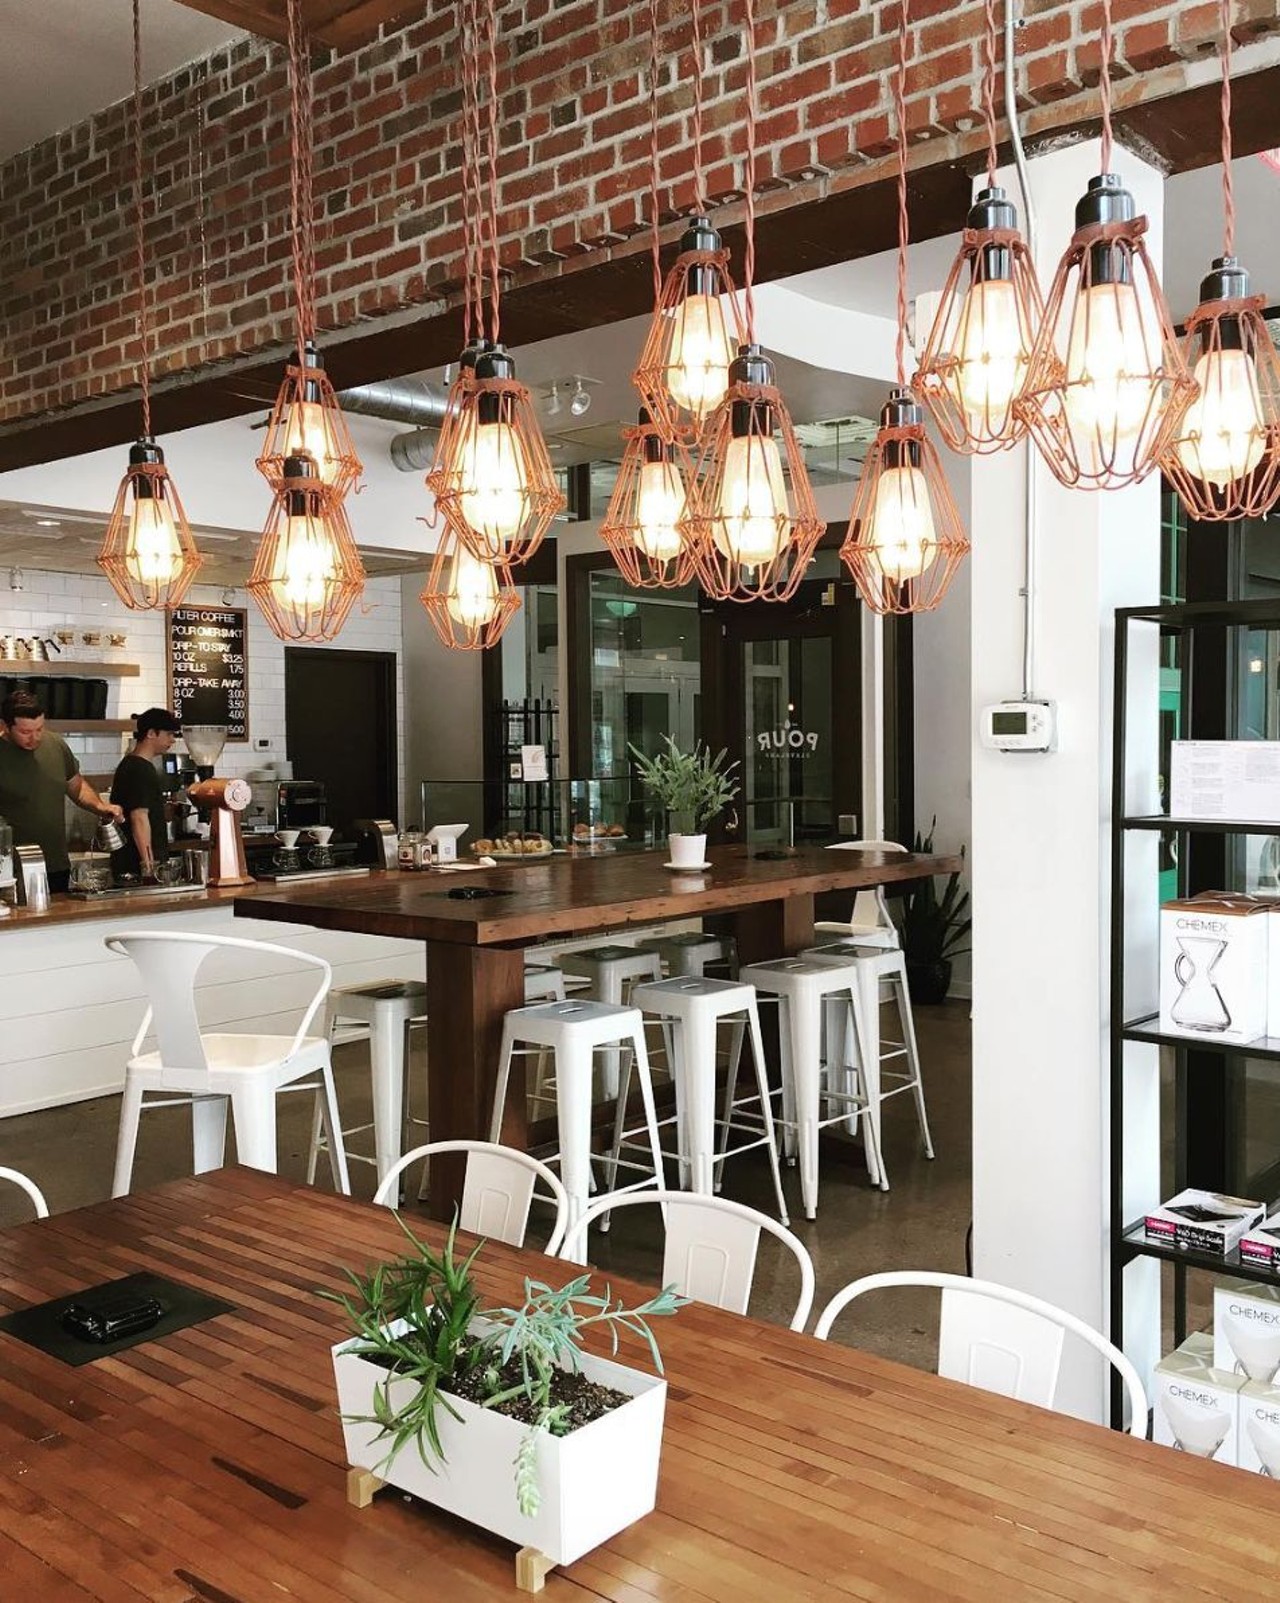  Pour Cleveland
530 Euclid Ave., 216-479-0395
This multi-roaster coffee bar, the first of its kind in Cleveland, serves fresh pour-over coffee and espresso along with hot and iced teas. 
Photo via pourcleveland/Instagram